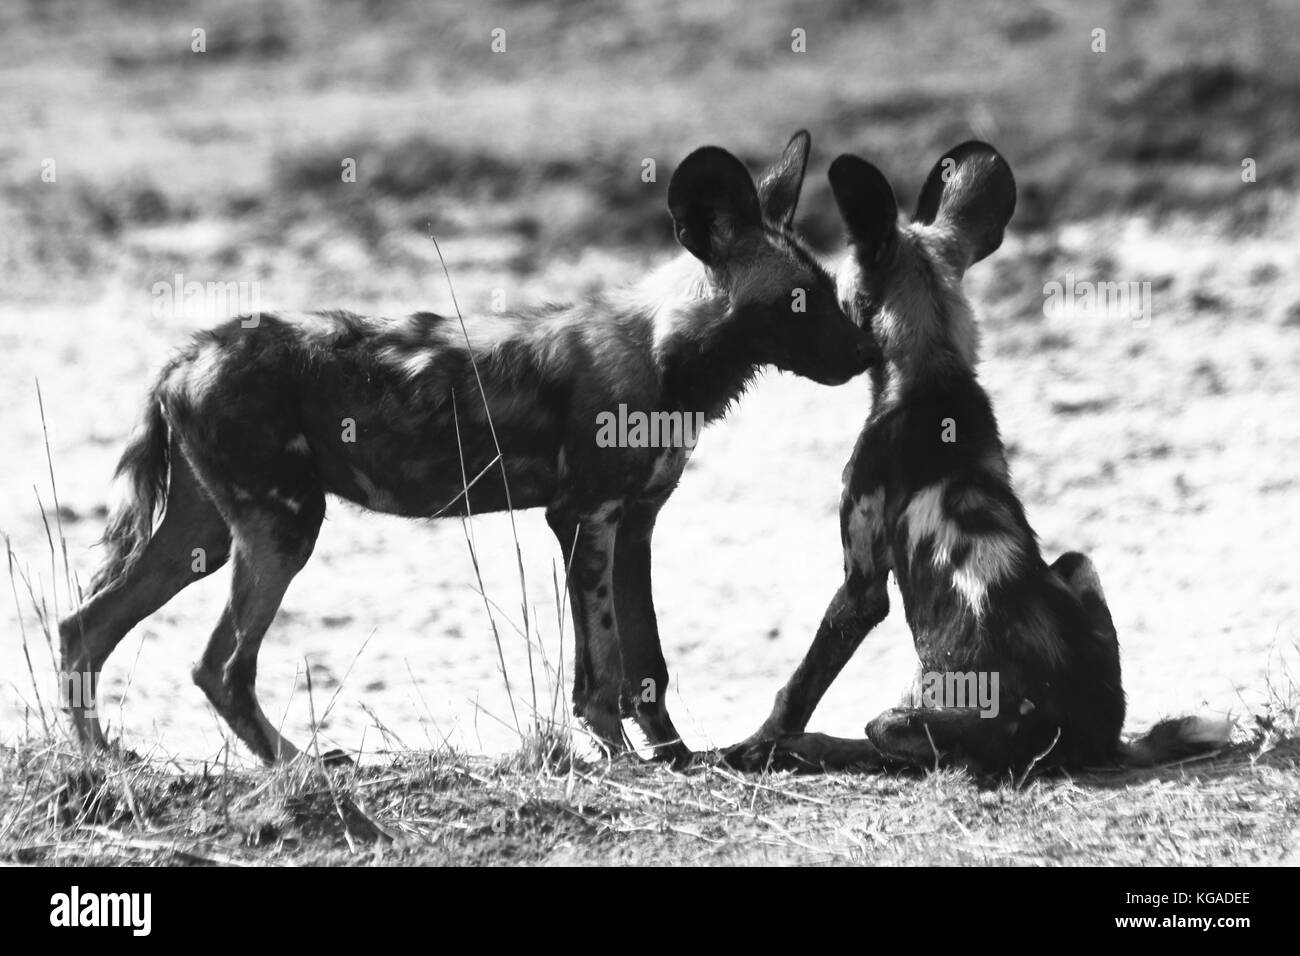 Wilde Hunde Lycoan pictus, in South Luangwa National Park, Sambia Stockfoto